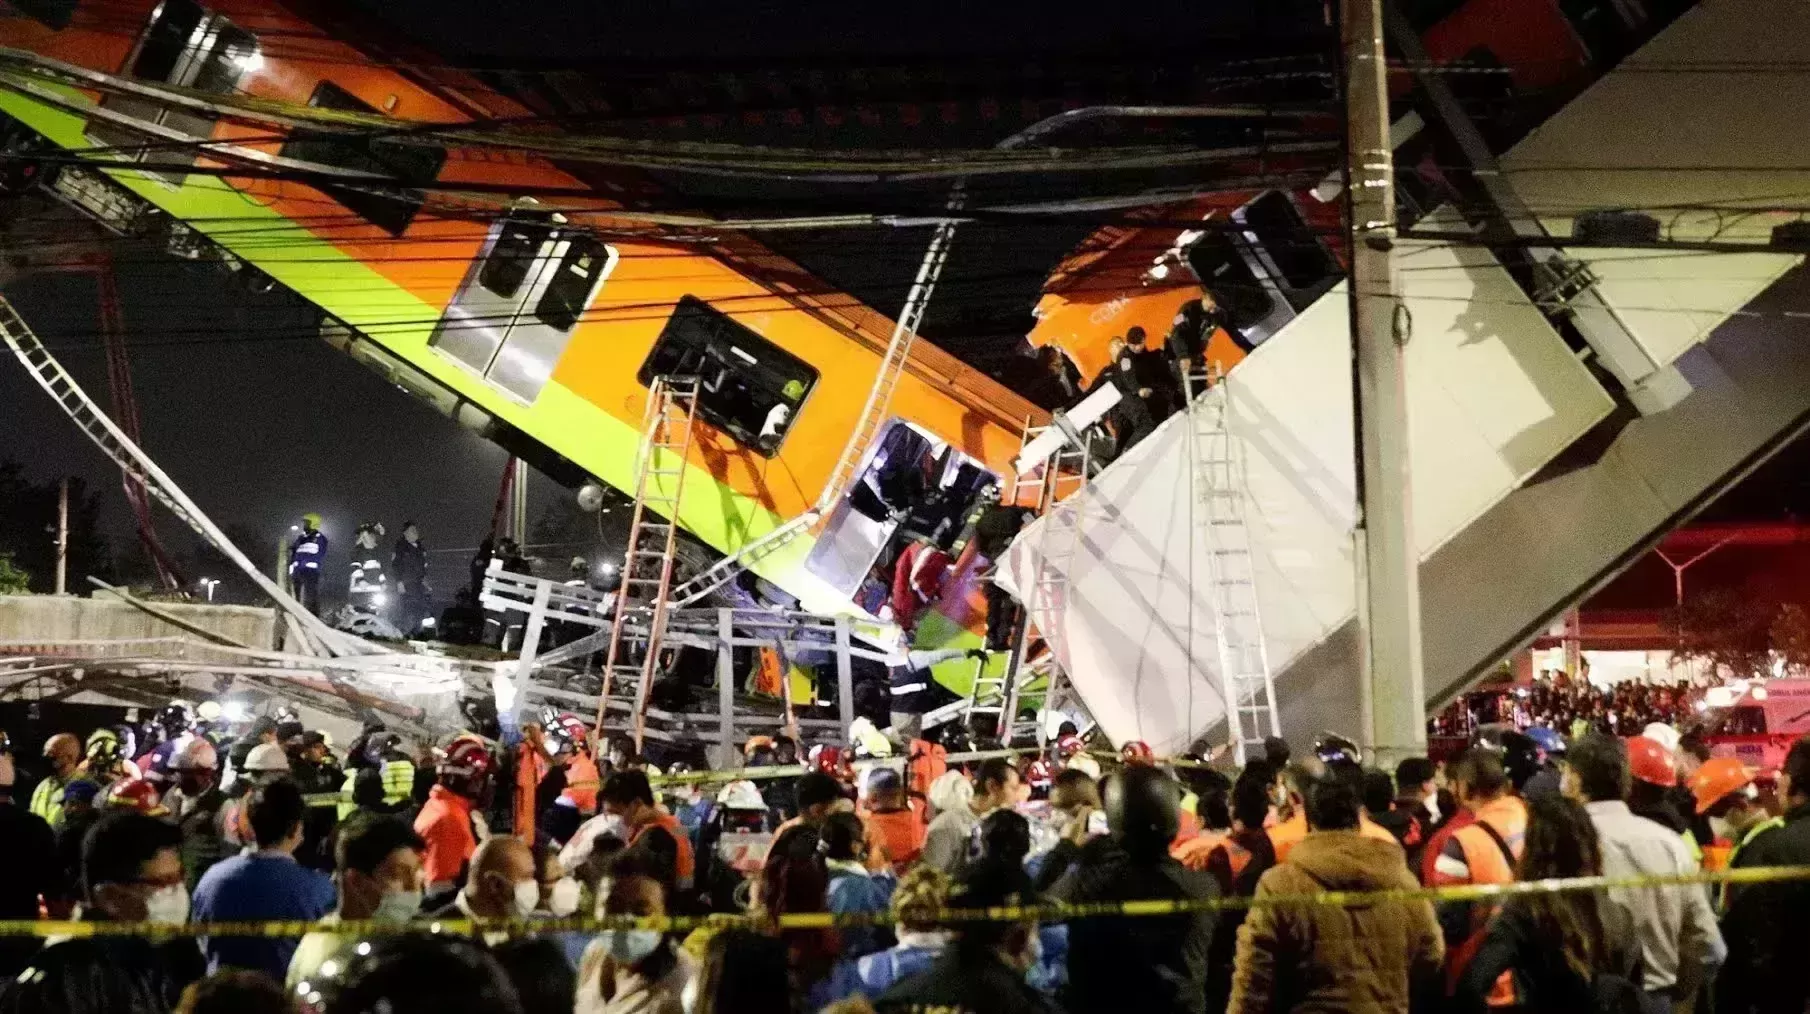 Overpass collapse in Mexico City kills 20, leaves 65 injured